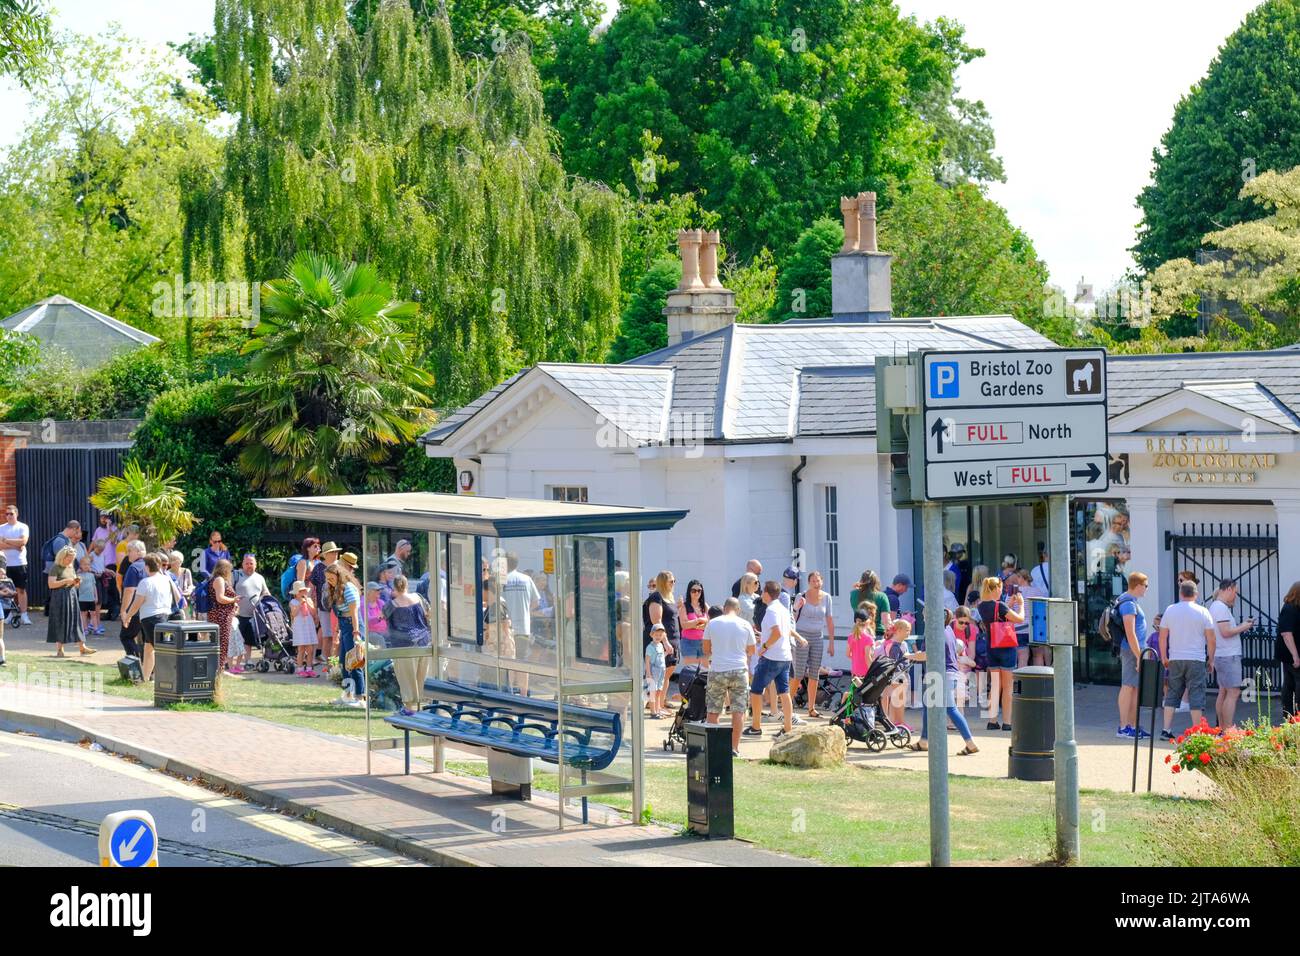 Bristol, UK. 29th Aug, 2020. Big crowd waiting to get into Bristol Zoo. The Zoo is closing its Clifton site on Sept 3rd, so after 186 years, this is the last Bank Holiday trip to the Zoo's Clifton site. The Zoo has taken the difficult decision to transfer to its South Gloucester site “Wild Place” to safeguard the future of its conservation work. Credit: JMF News/Alamy Live News Stock Photo